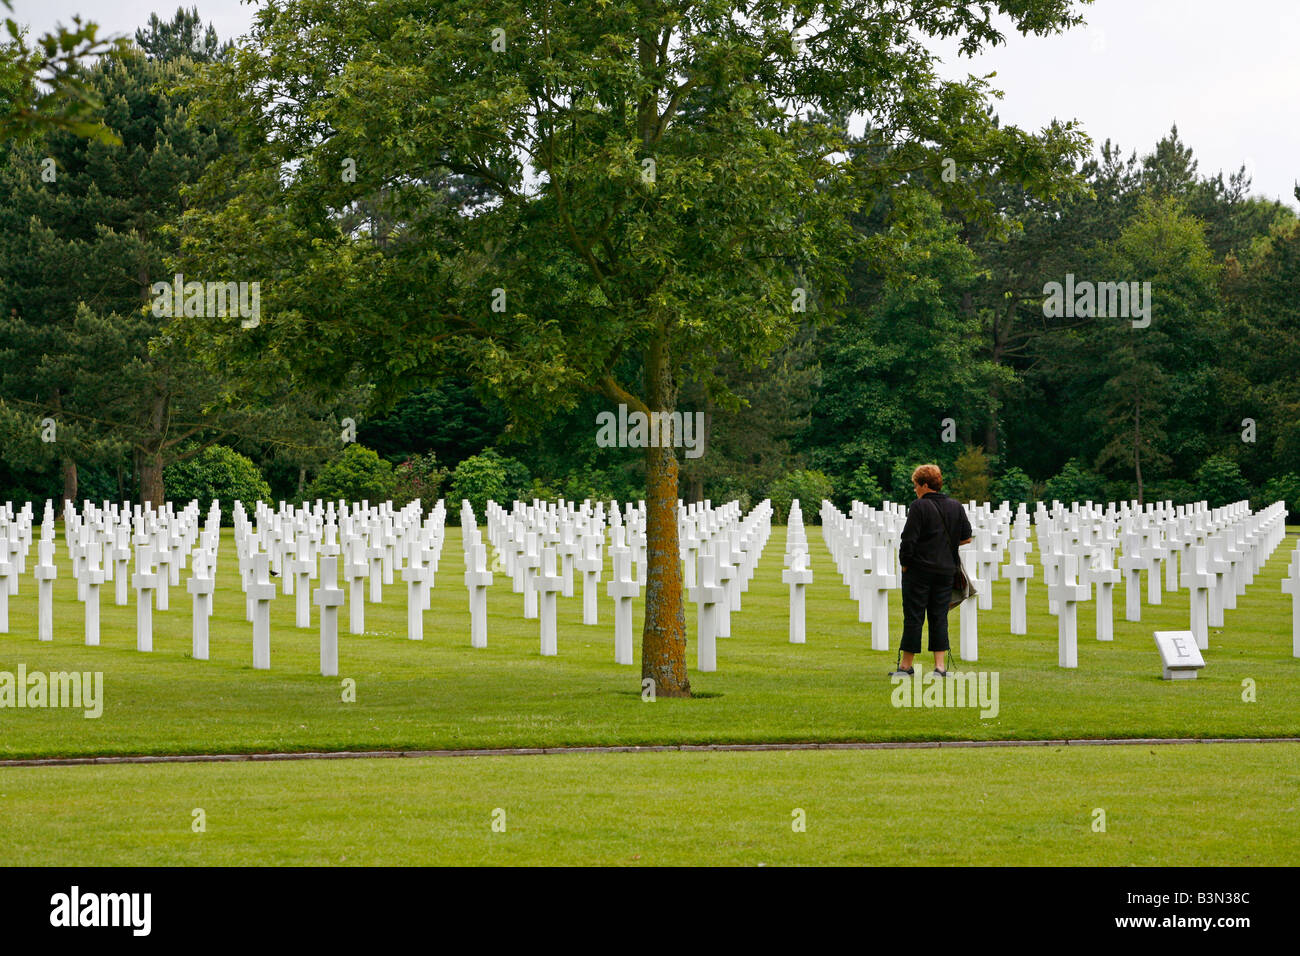 July 2008 - The American Military Cemetery in Colleville sur mer Normandy France Stock Photo